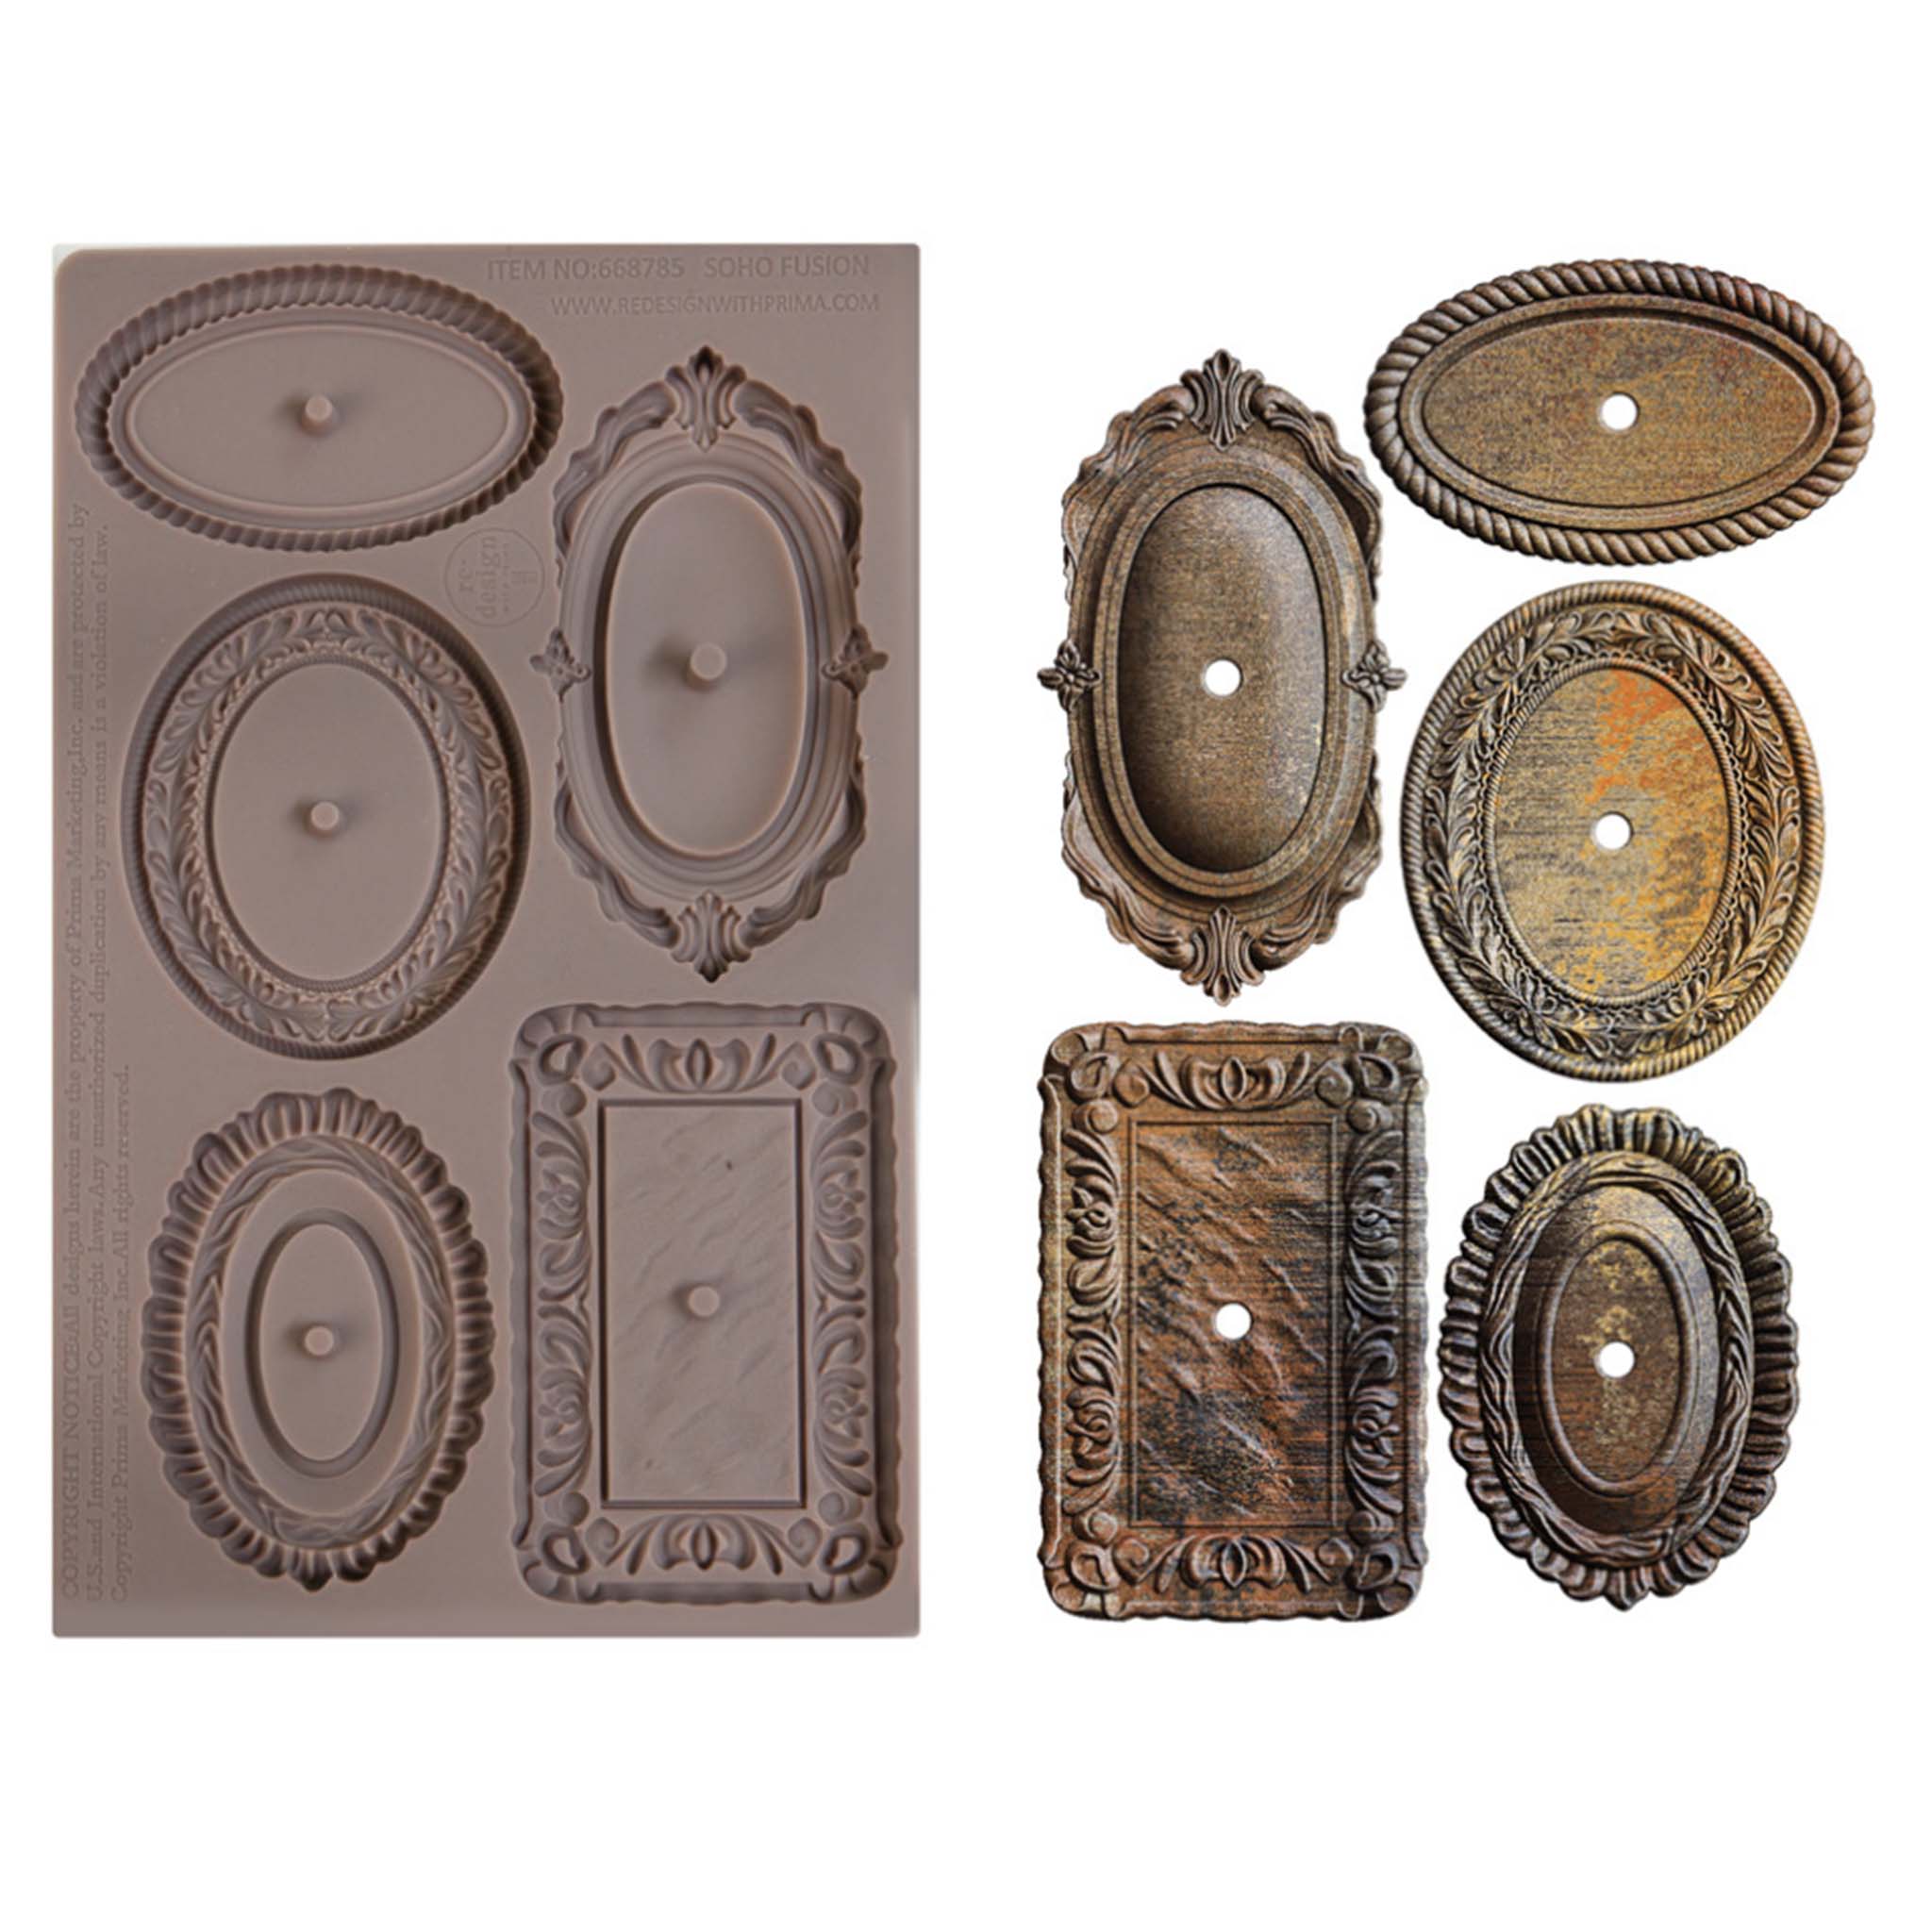 A brown silicone mold and bronze colored castings of 5 ornate drawer pull plates are against a white background.